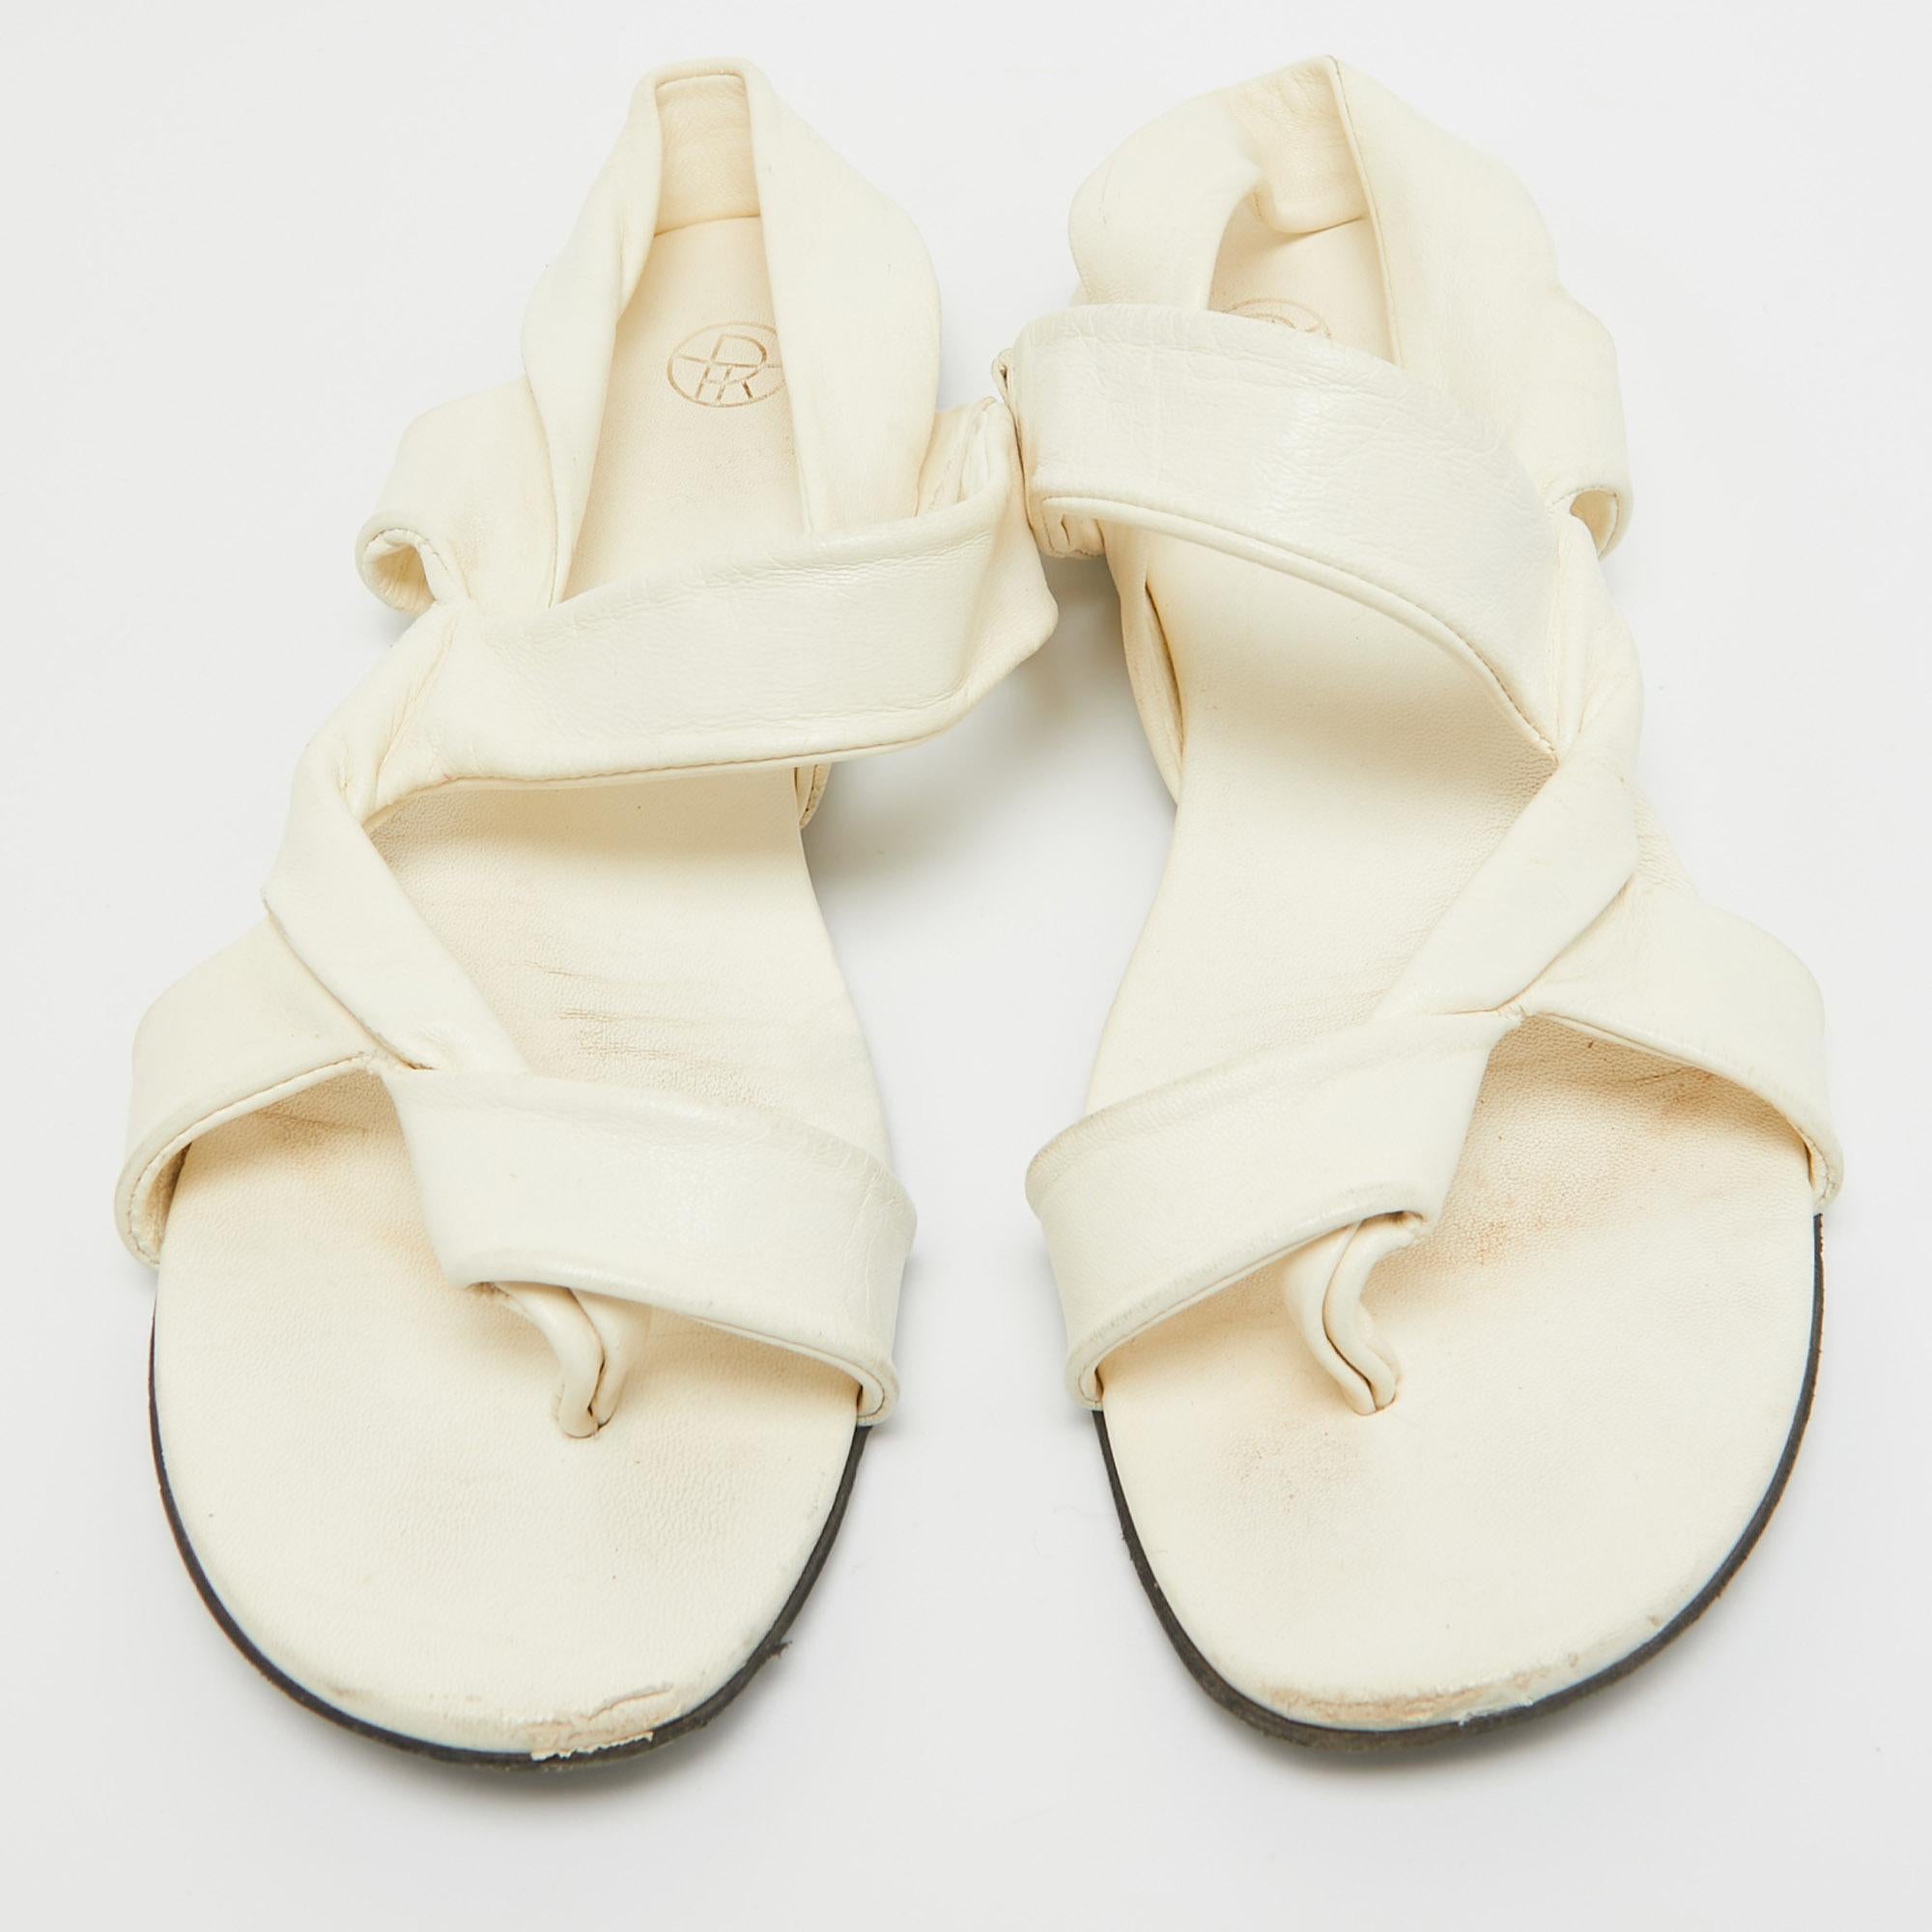 These sandals will frame your feet in an elegant manner. Crafted from quality materials, they flaunt a classy display, comfortable insoles & durable heels.

